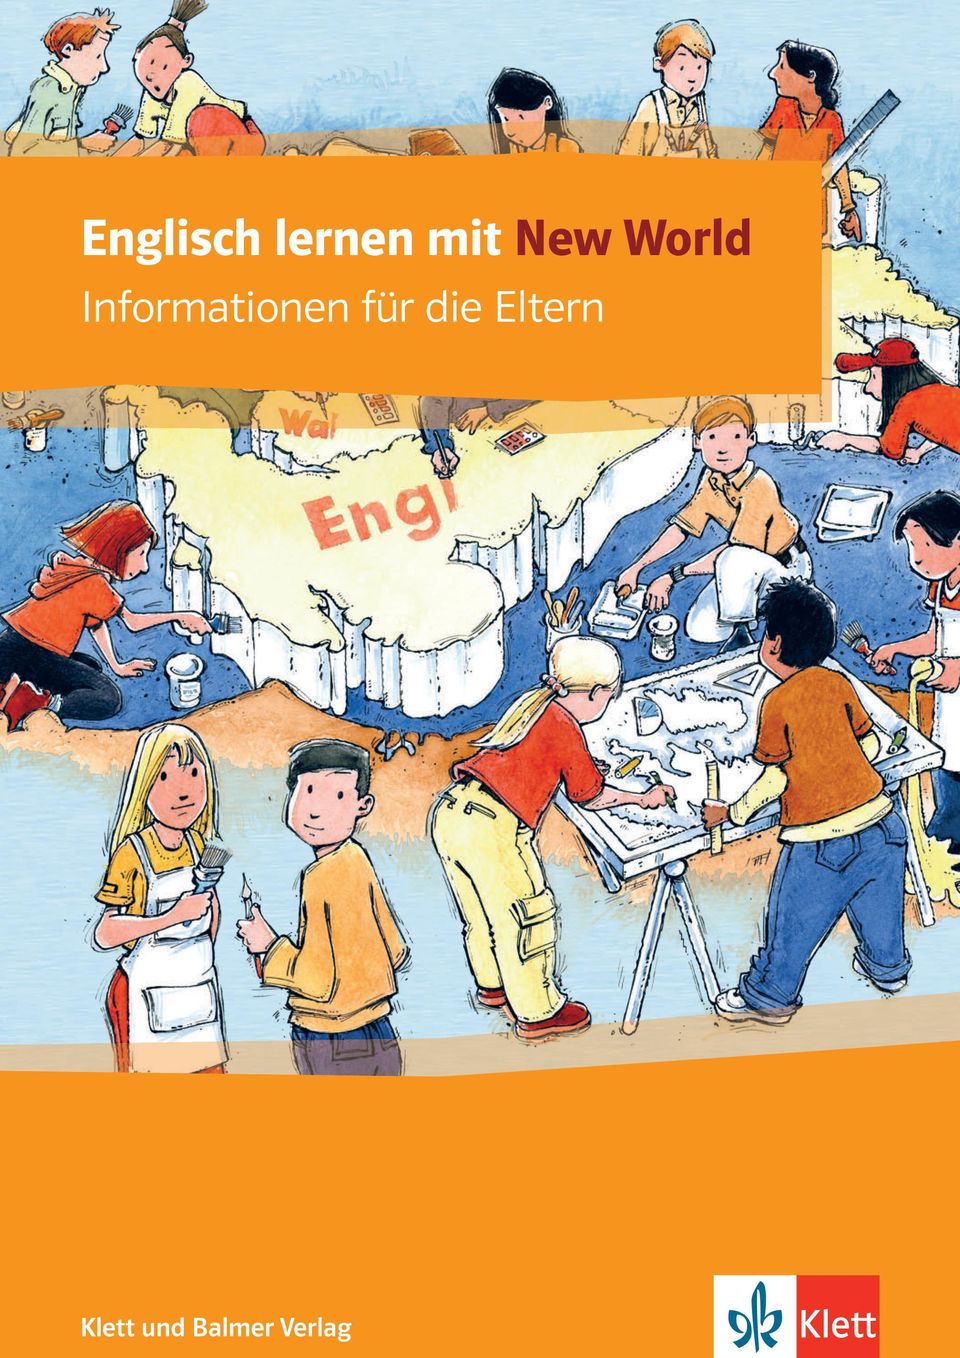 World English as a second foreign